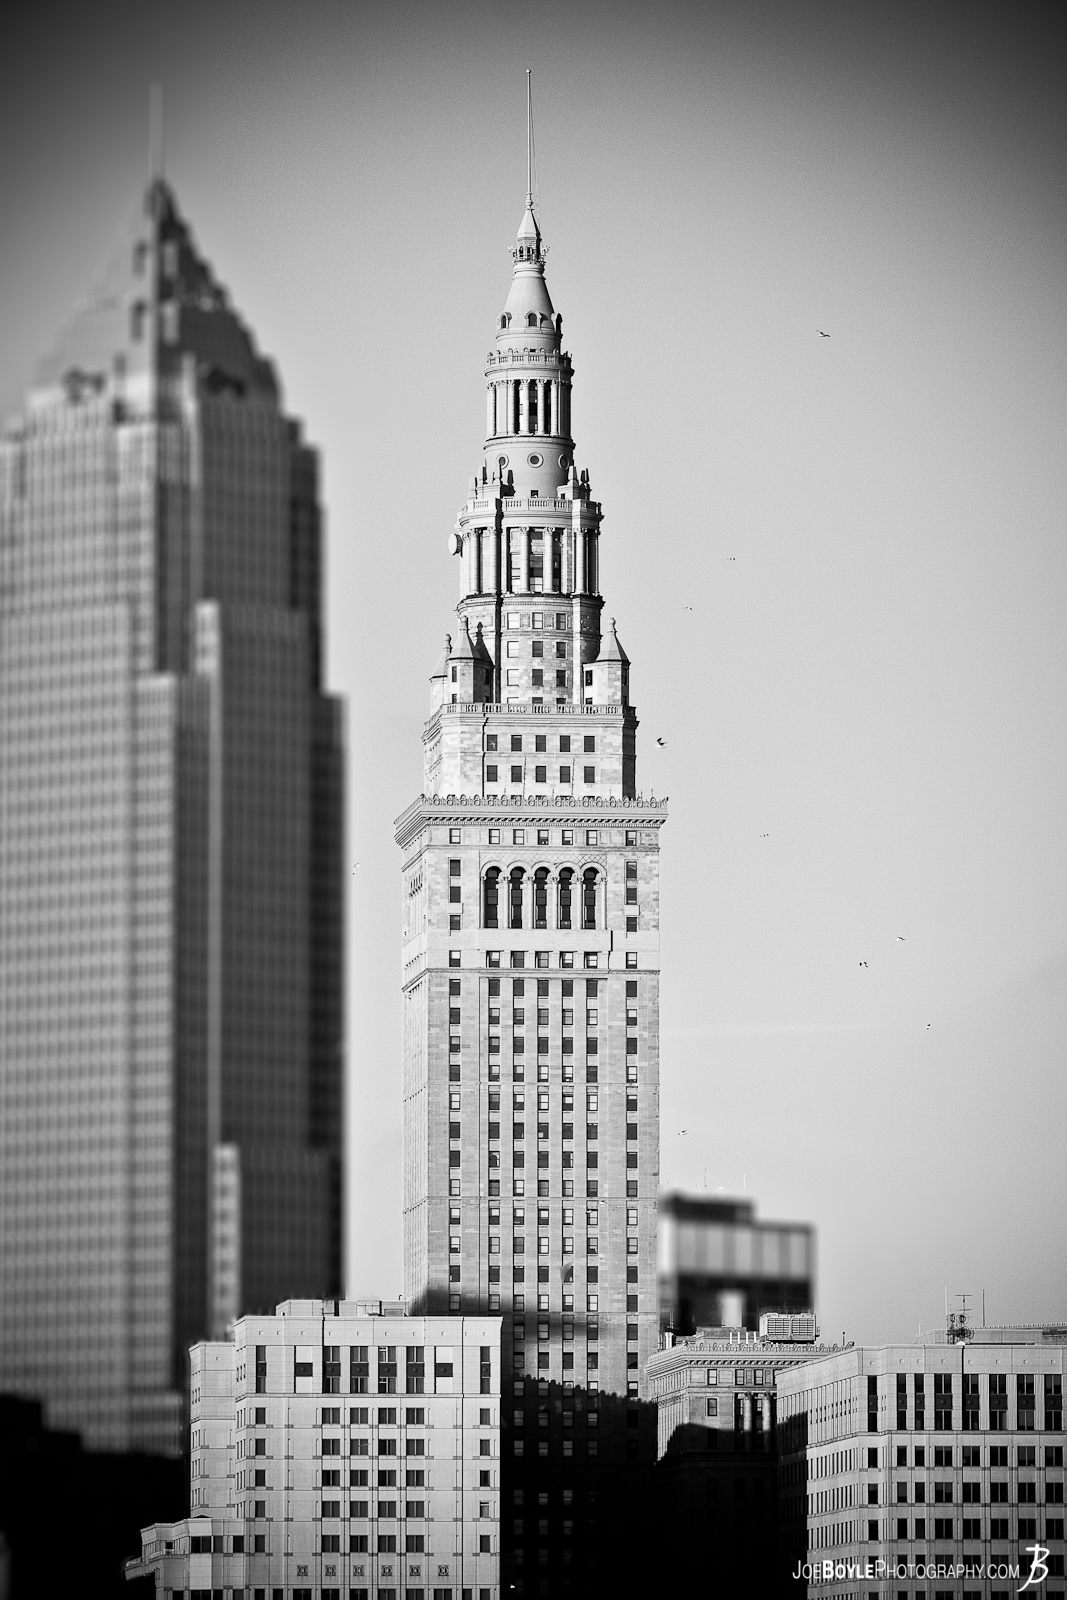  I took this image from the Hope Memorial Bridge. Featured here is the Terminal Tower and the blurred out Key Tower. 